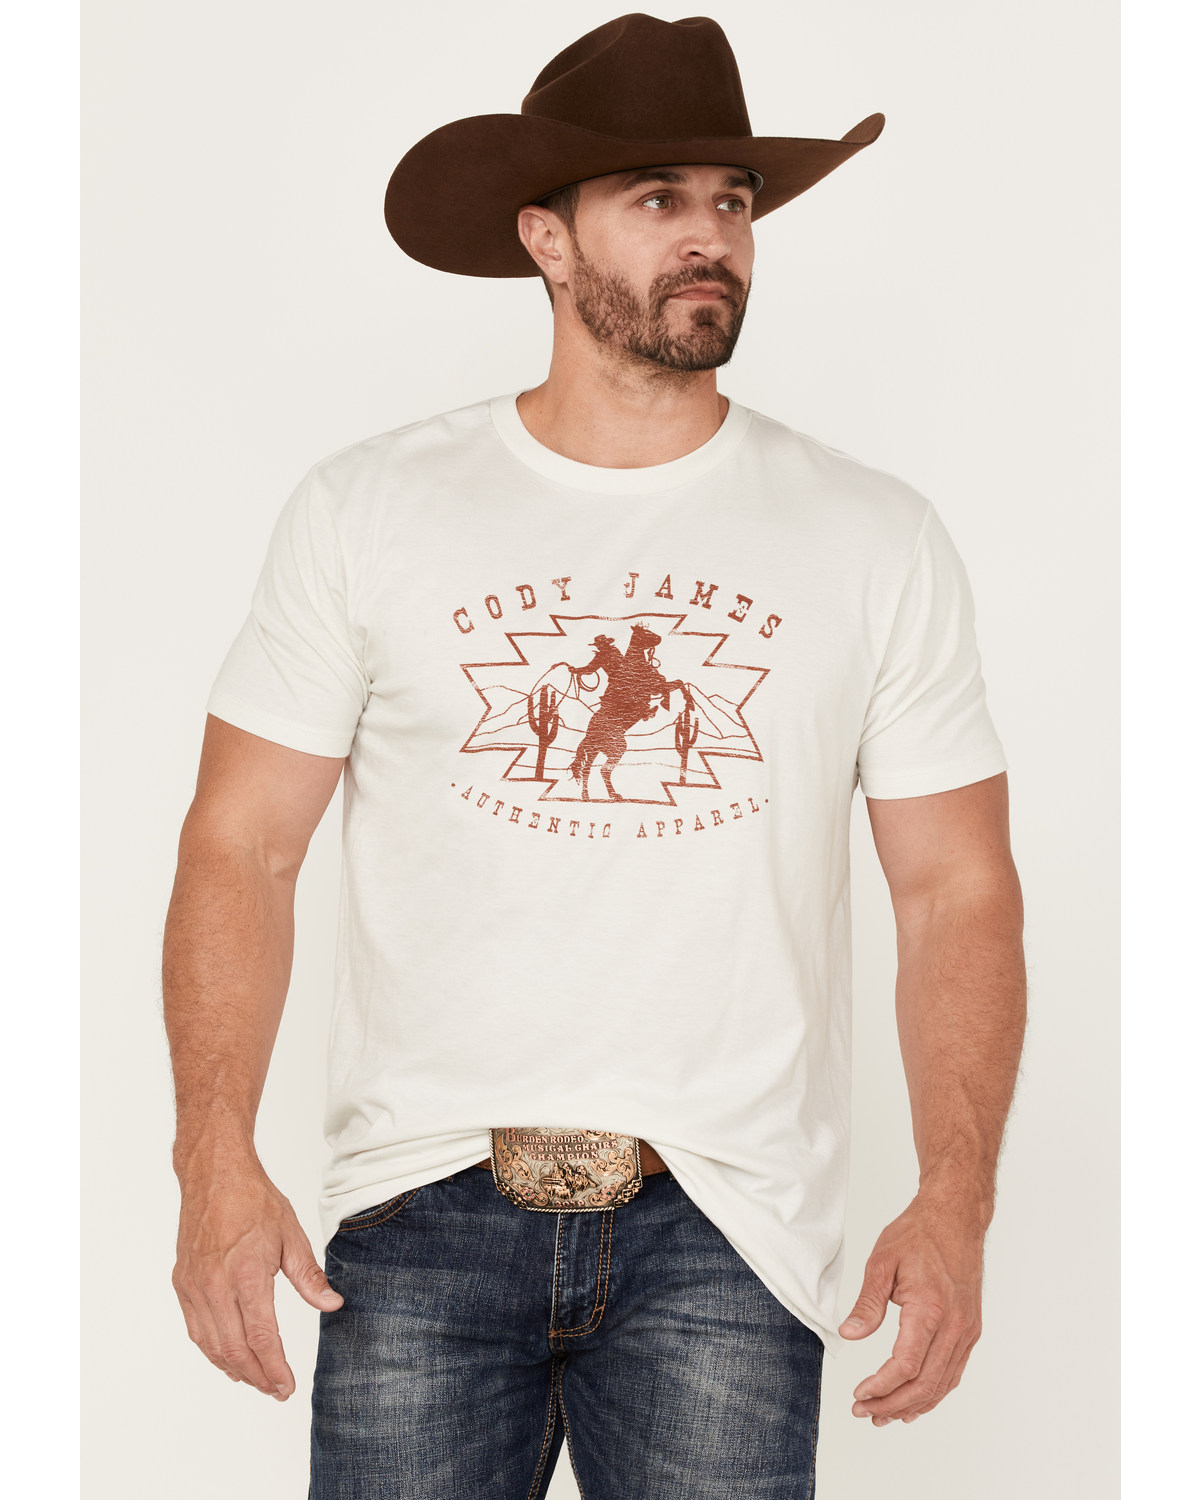 Cody James Men's Giddy Up Rodeo Graphic Short Sleeve T-Shirt